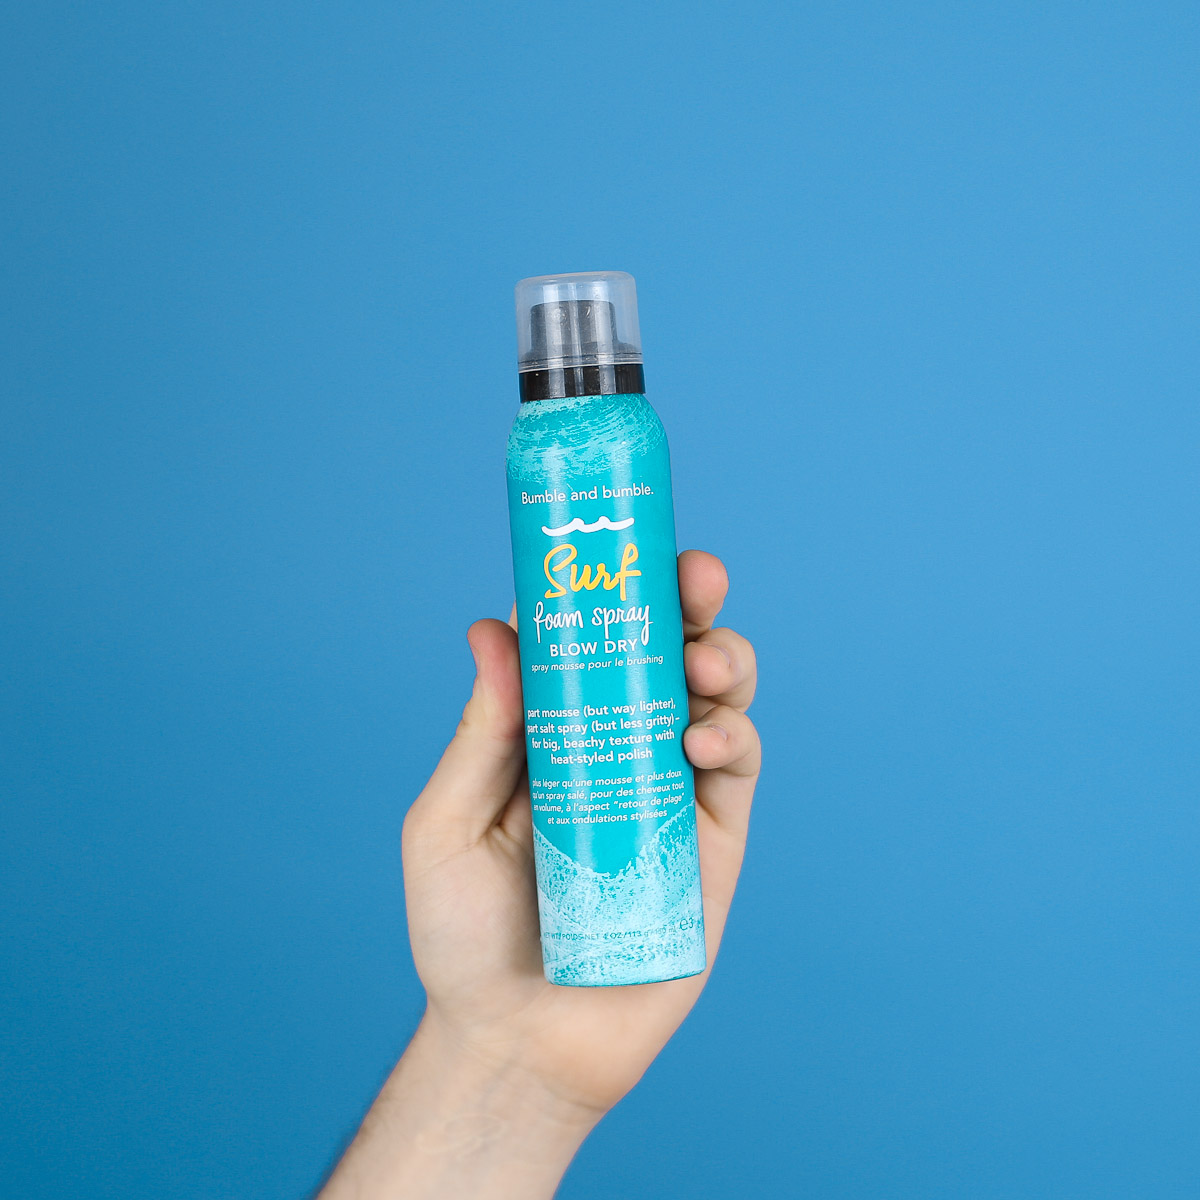 BUMBLE AND BUMBLE SURF SPRAY  Fine, wavy/curly hair 